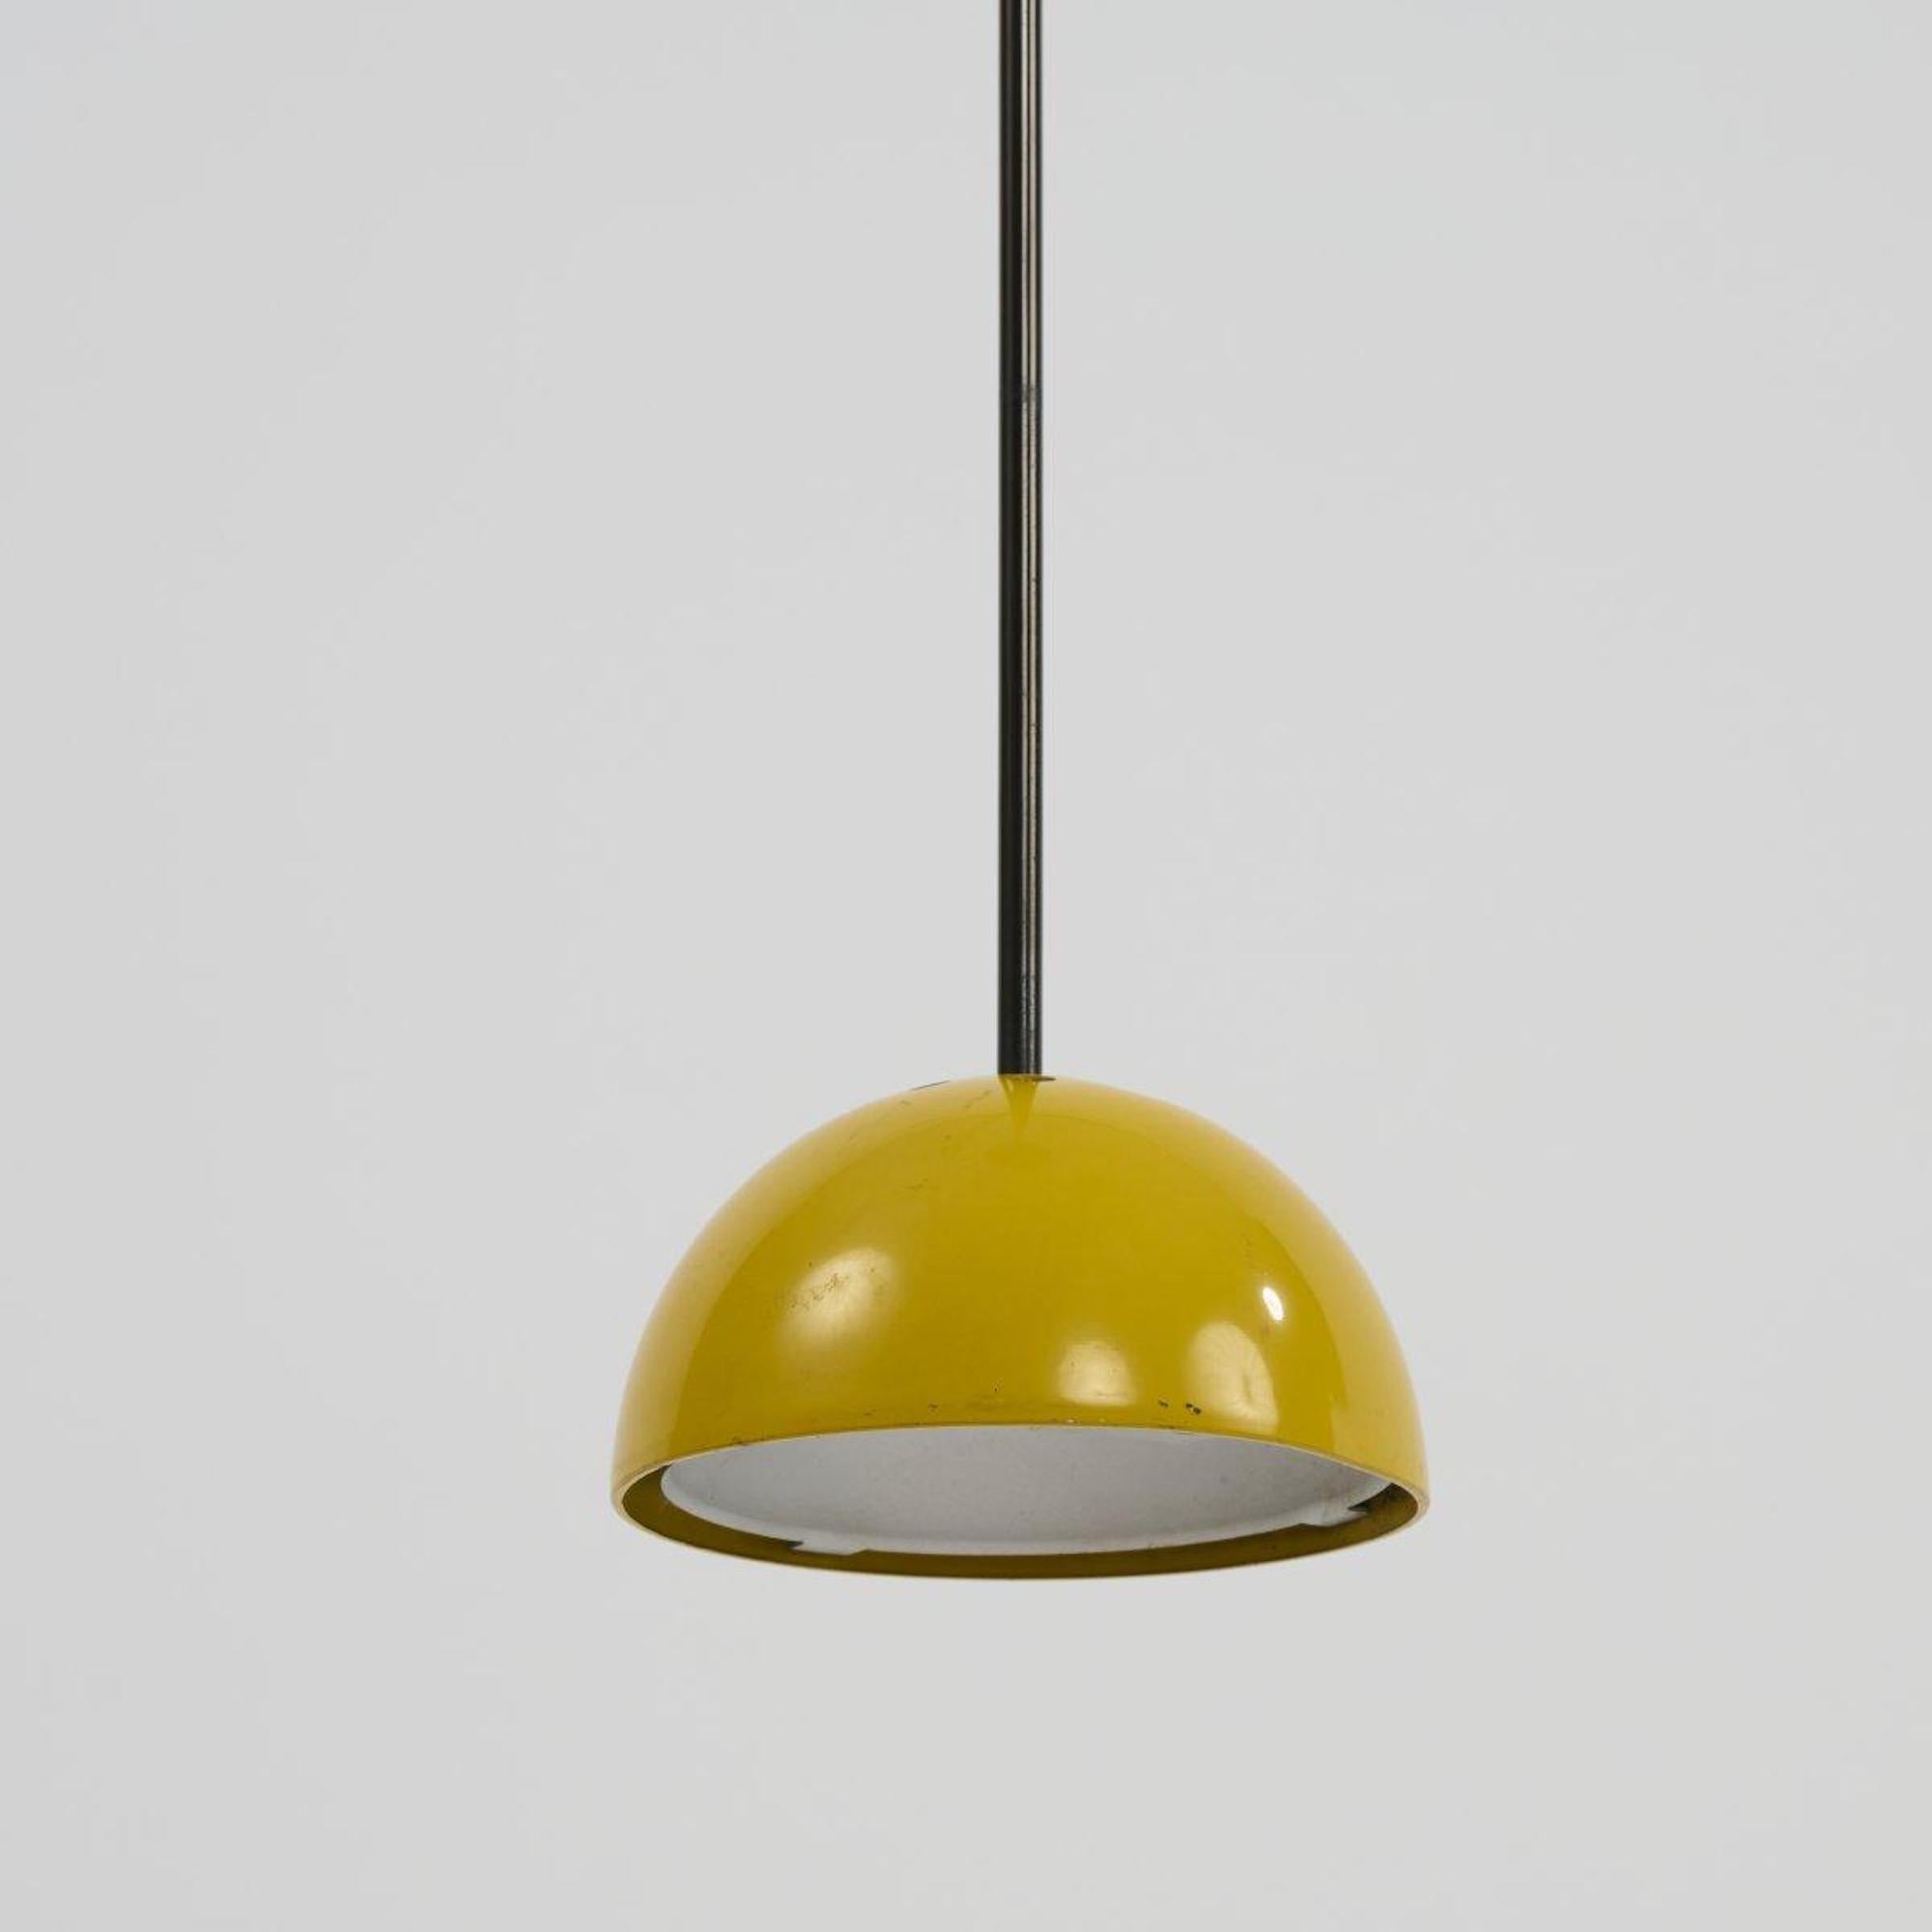 Late 20th Century Alesia Ceiling Lamp by Carlo Forcolini, Italy 1981. For Sale